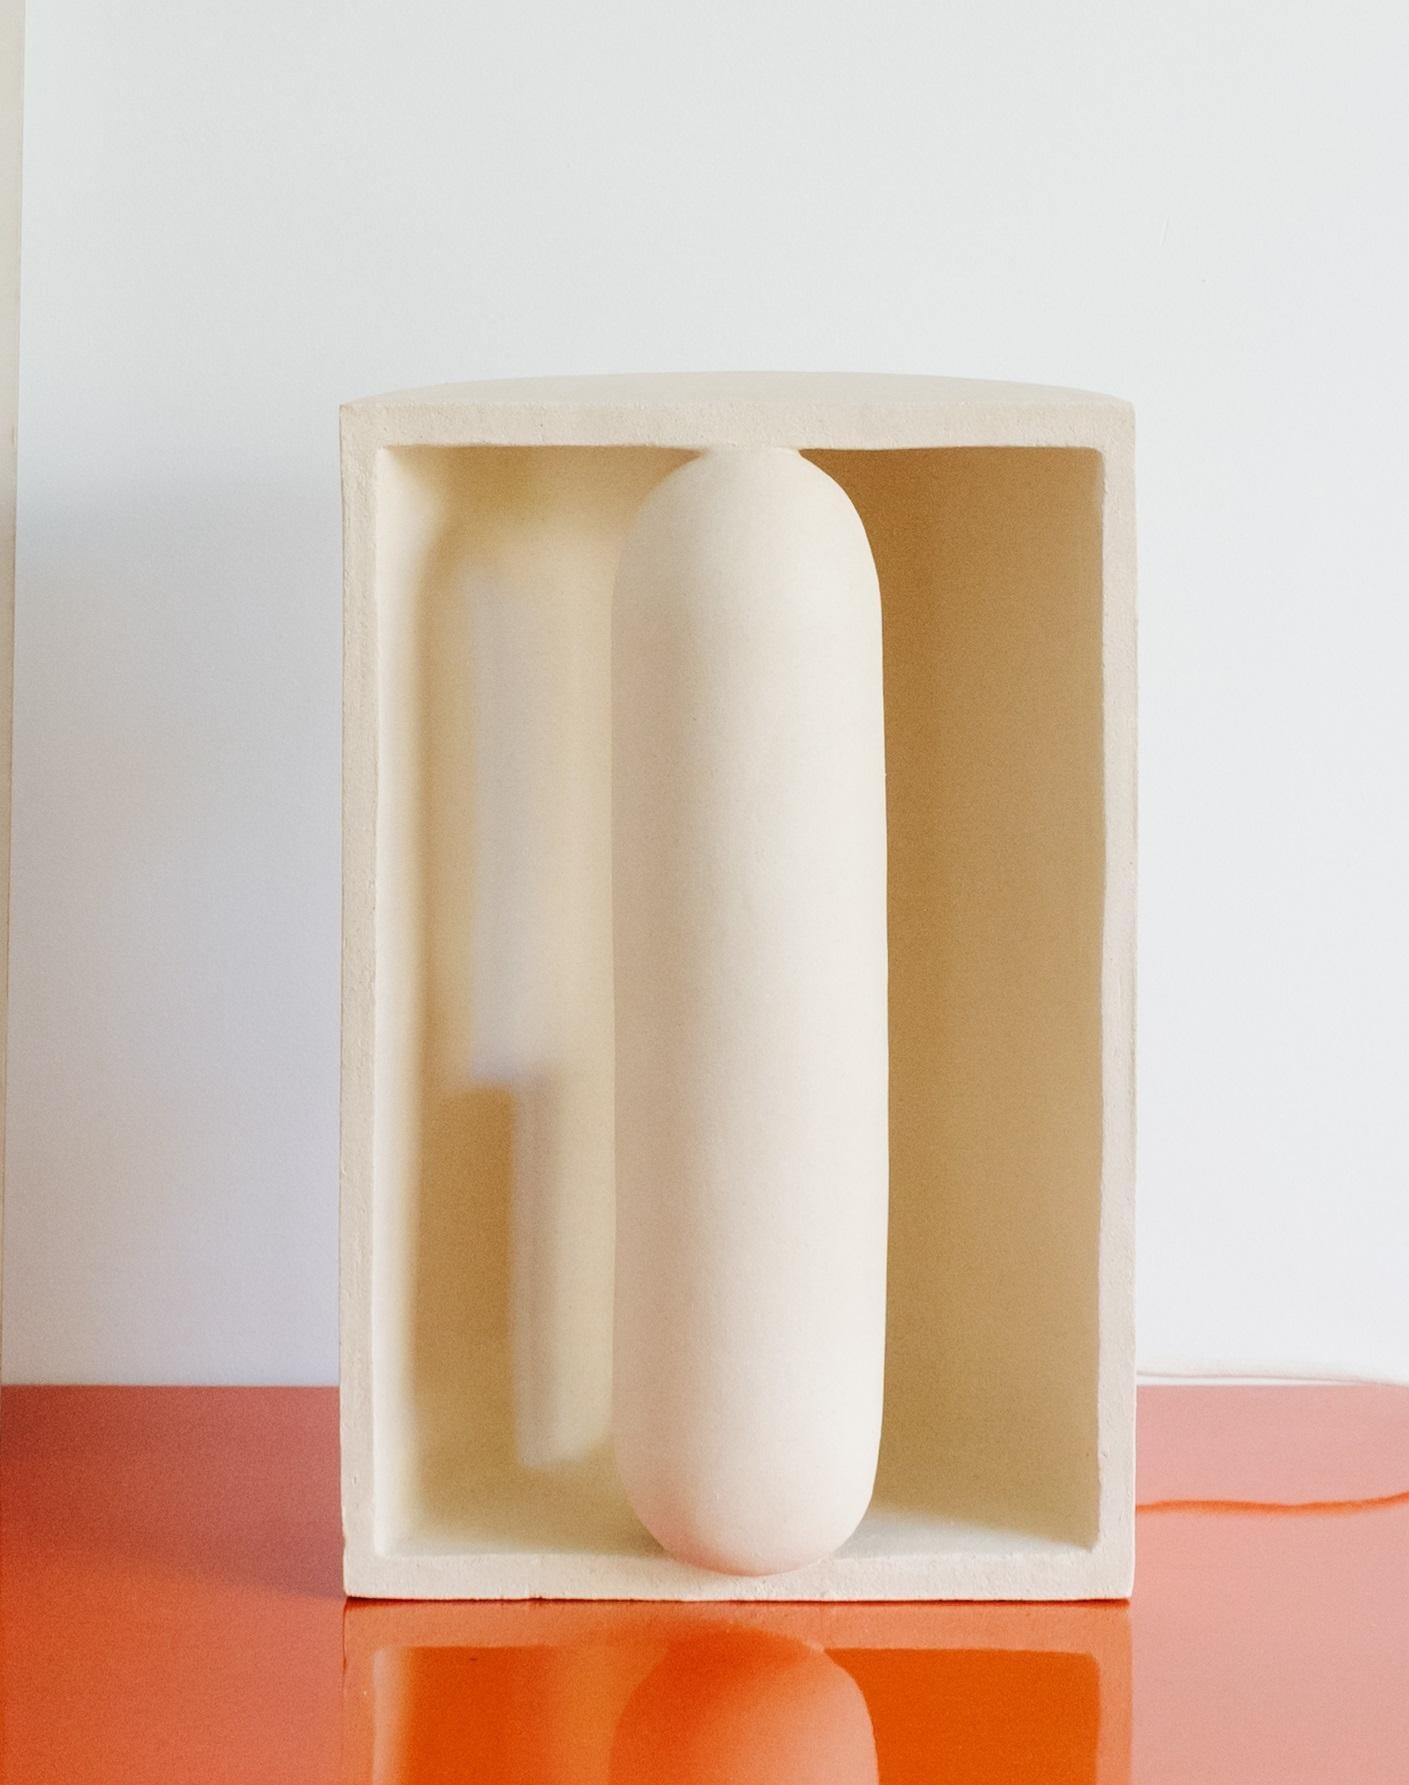 Kyrtos Table Lamp by Lisa Allegra
Dimensions: W 15 x D 22 x H 33.5 cm.
Materials: Ceramic.

Born in 1986 in Paris, Lisa Allegra has earned in 2010 a degree in furniture design from the École Supérieure des Arts Décoratifs. She has worked for Tsé&Tsé